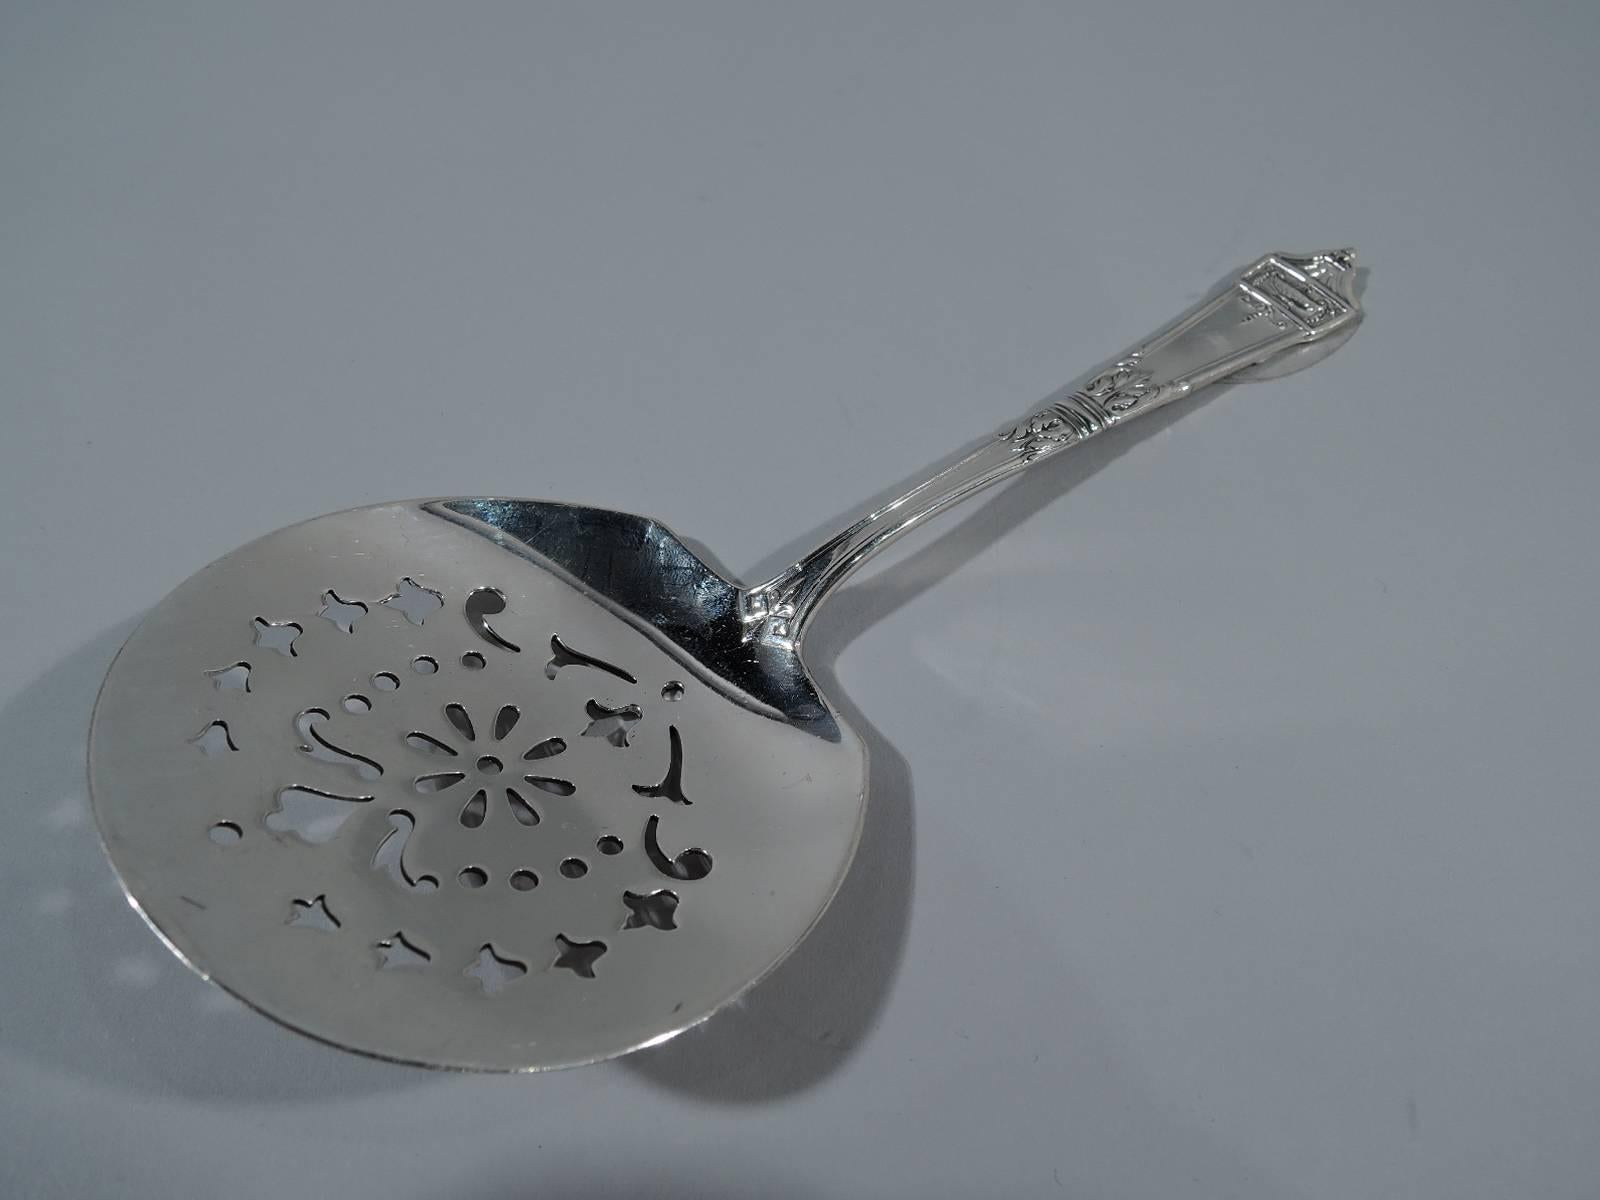 Sterling silver tomato server in Lansdowne pattern. Made by Gorham in Providence. Round blade with ornamental piercing. A fine serving piece in the Adams style pattern that was designed by Barton P. Jenks and first produced in 1917. Hallmarked.